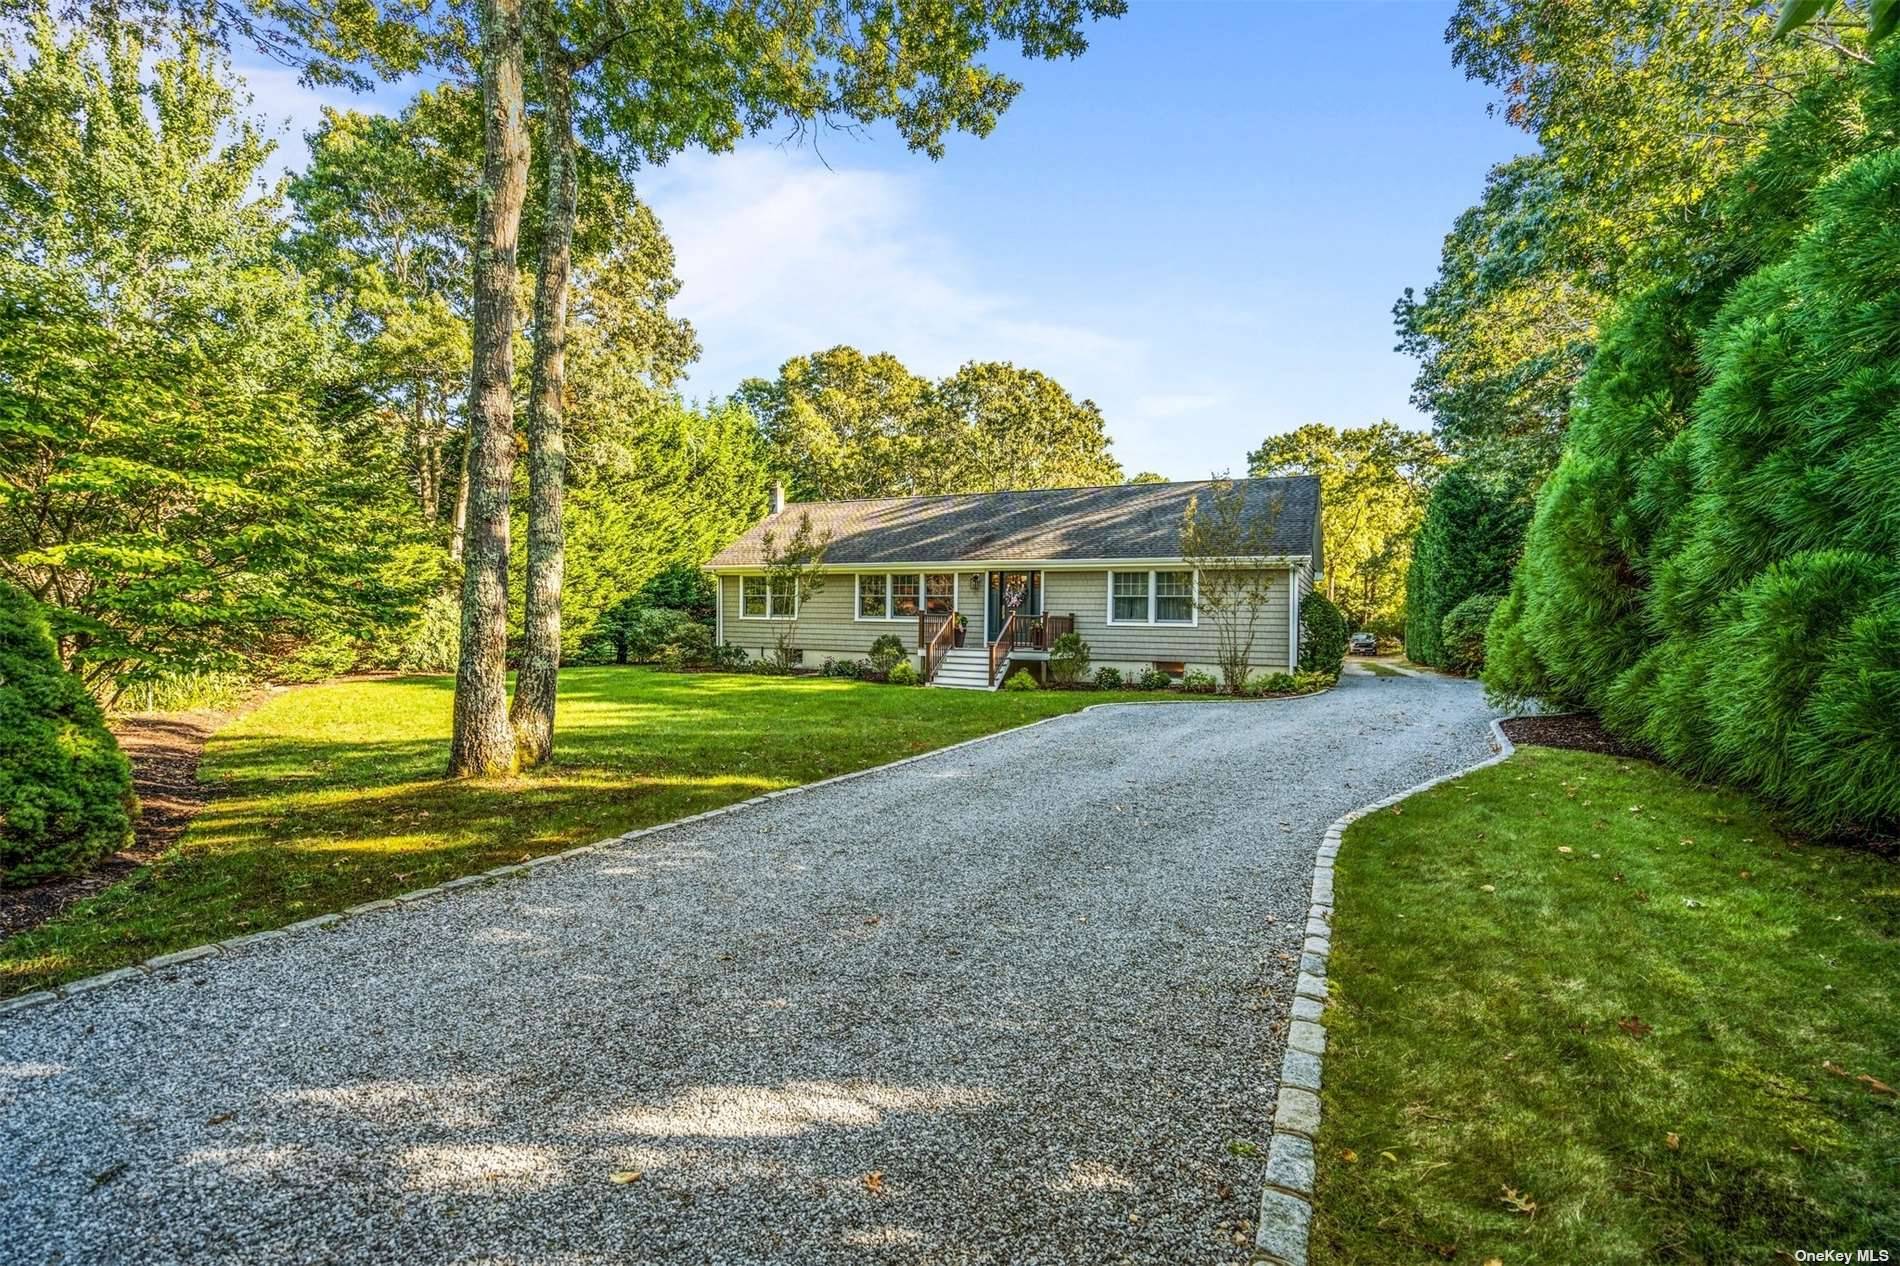 Tremendous opportunity to own a very private getaway in the Hamptons.